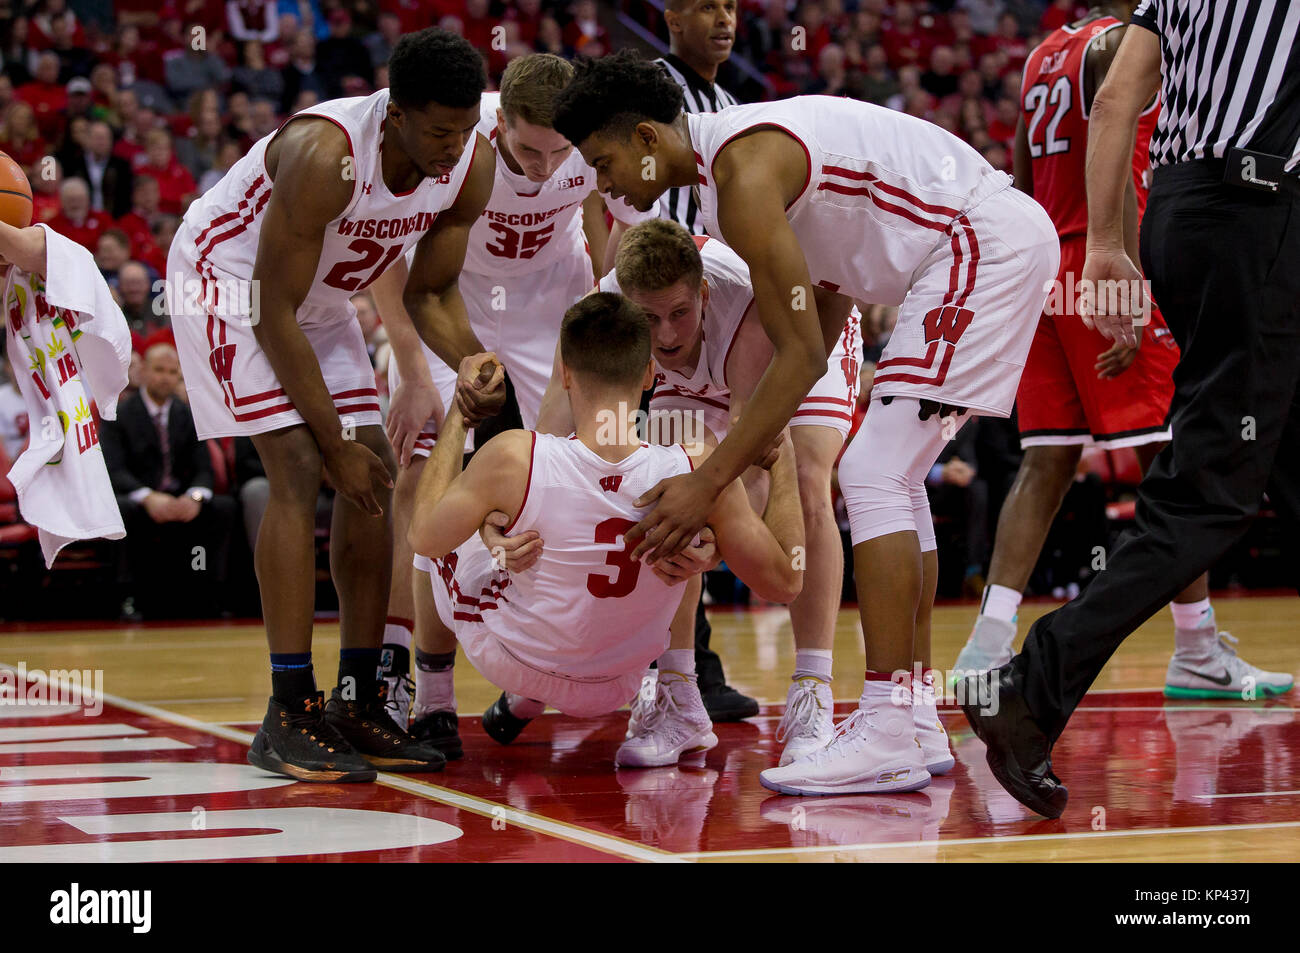 Madison, WI, USA. 13th Dec, 2017. Wisconsin Badgers guard Walt McGrory #3 is helped up by his teammates after being fouled going up for a shot during the NCAA Basketball game between the Western Kentucky Hilltoppers and the Wisconsin Badgers at the Kohl Center in Madison, WI. Wisconsin defeated Western Kentucky 81-80. John Fisher/CSM/Alamy Live News Stock Photo